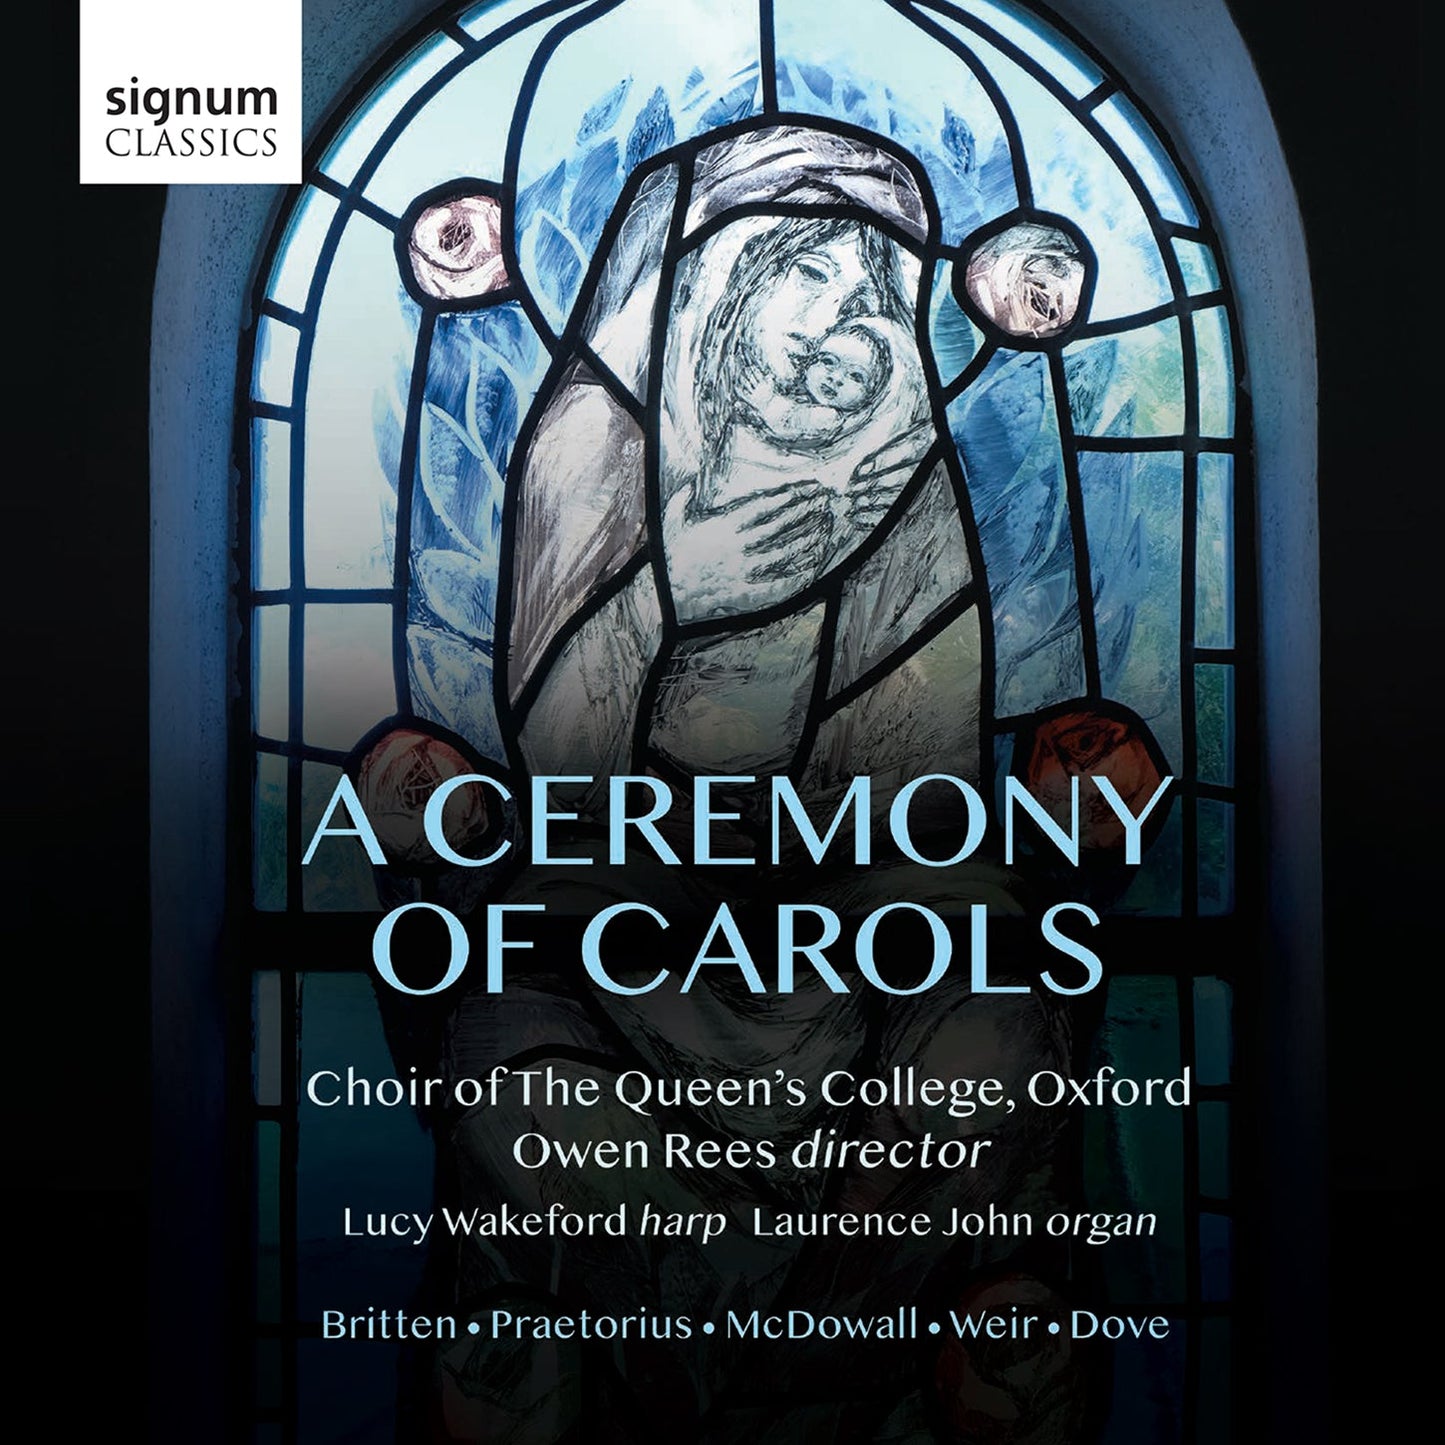 A Ceremony of Carols / Queen's College Choir